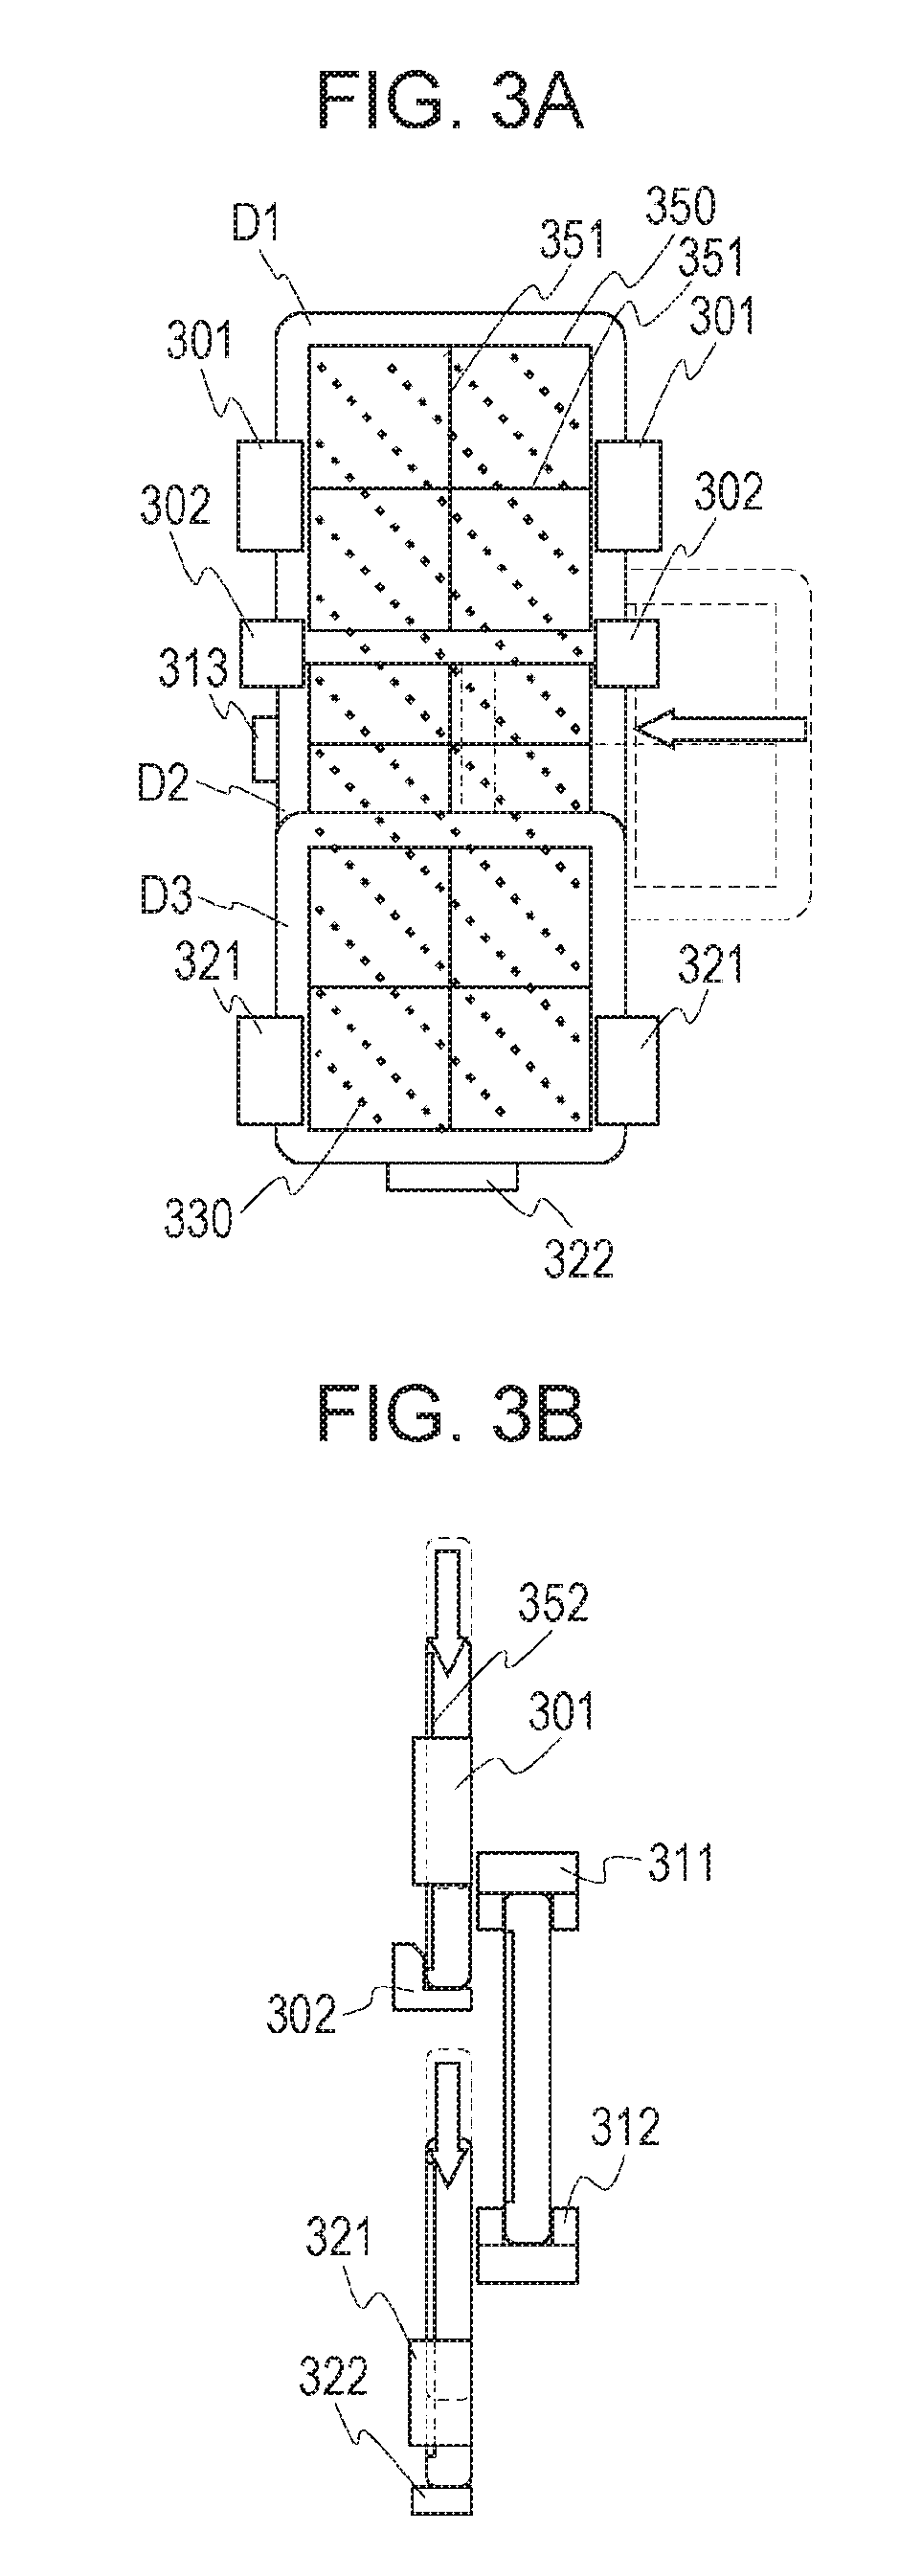 Radiation imaging system comprising a plurality of radiation imaging devices and a plurality of retainers configured to position and retain the plurality of radiation imaging devices